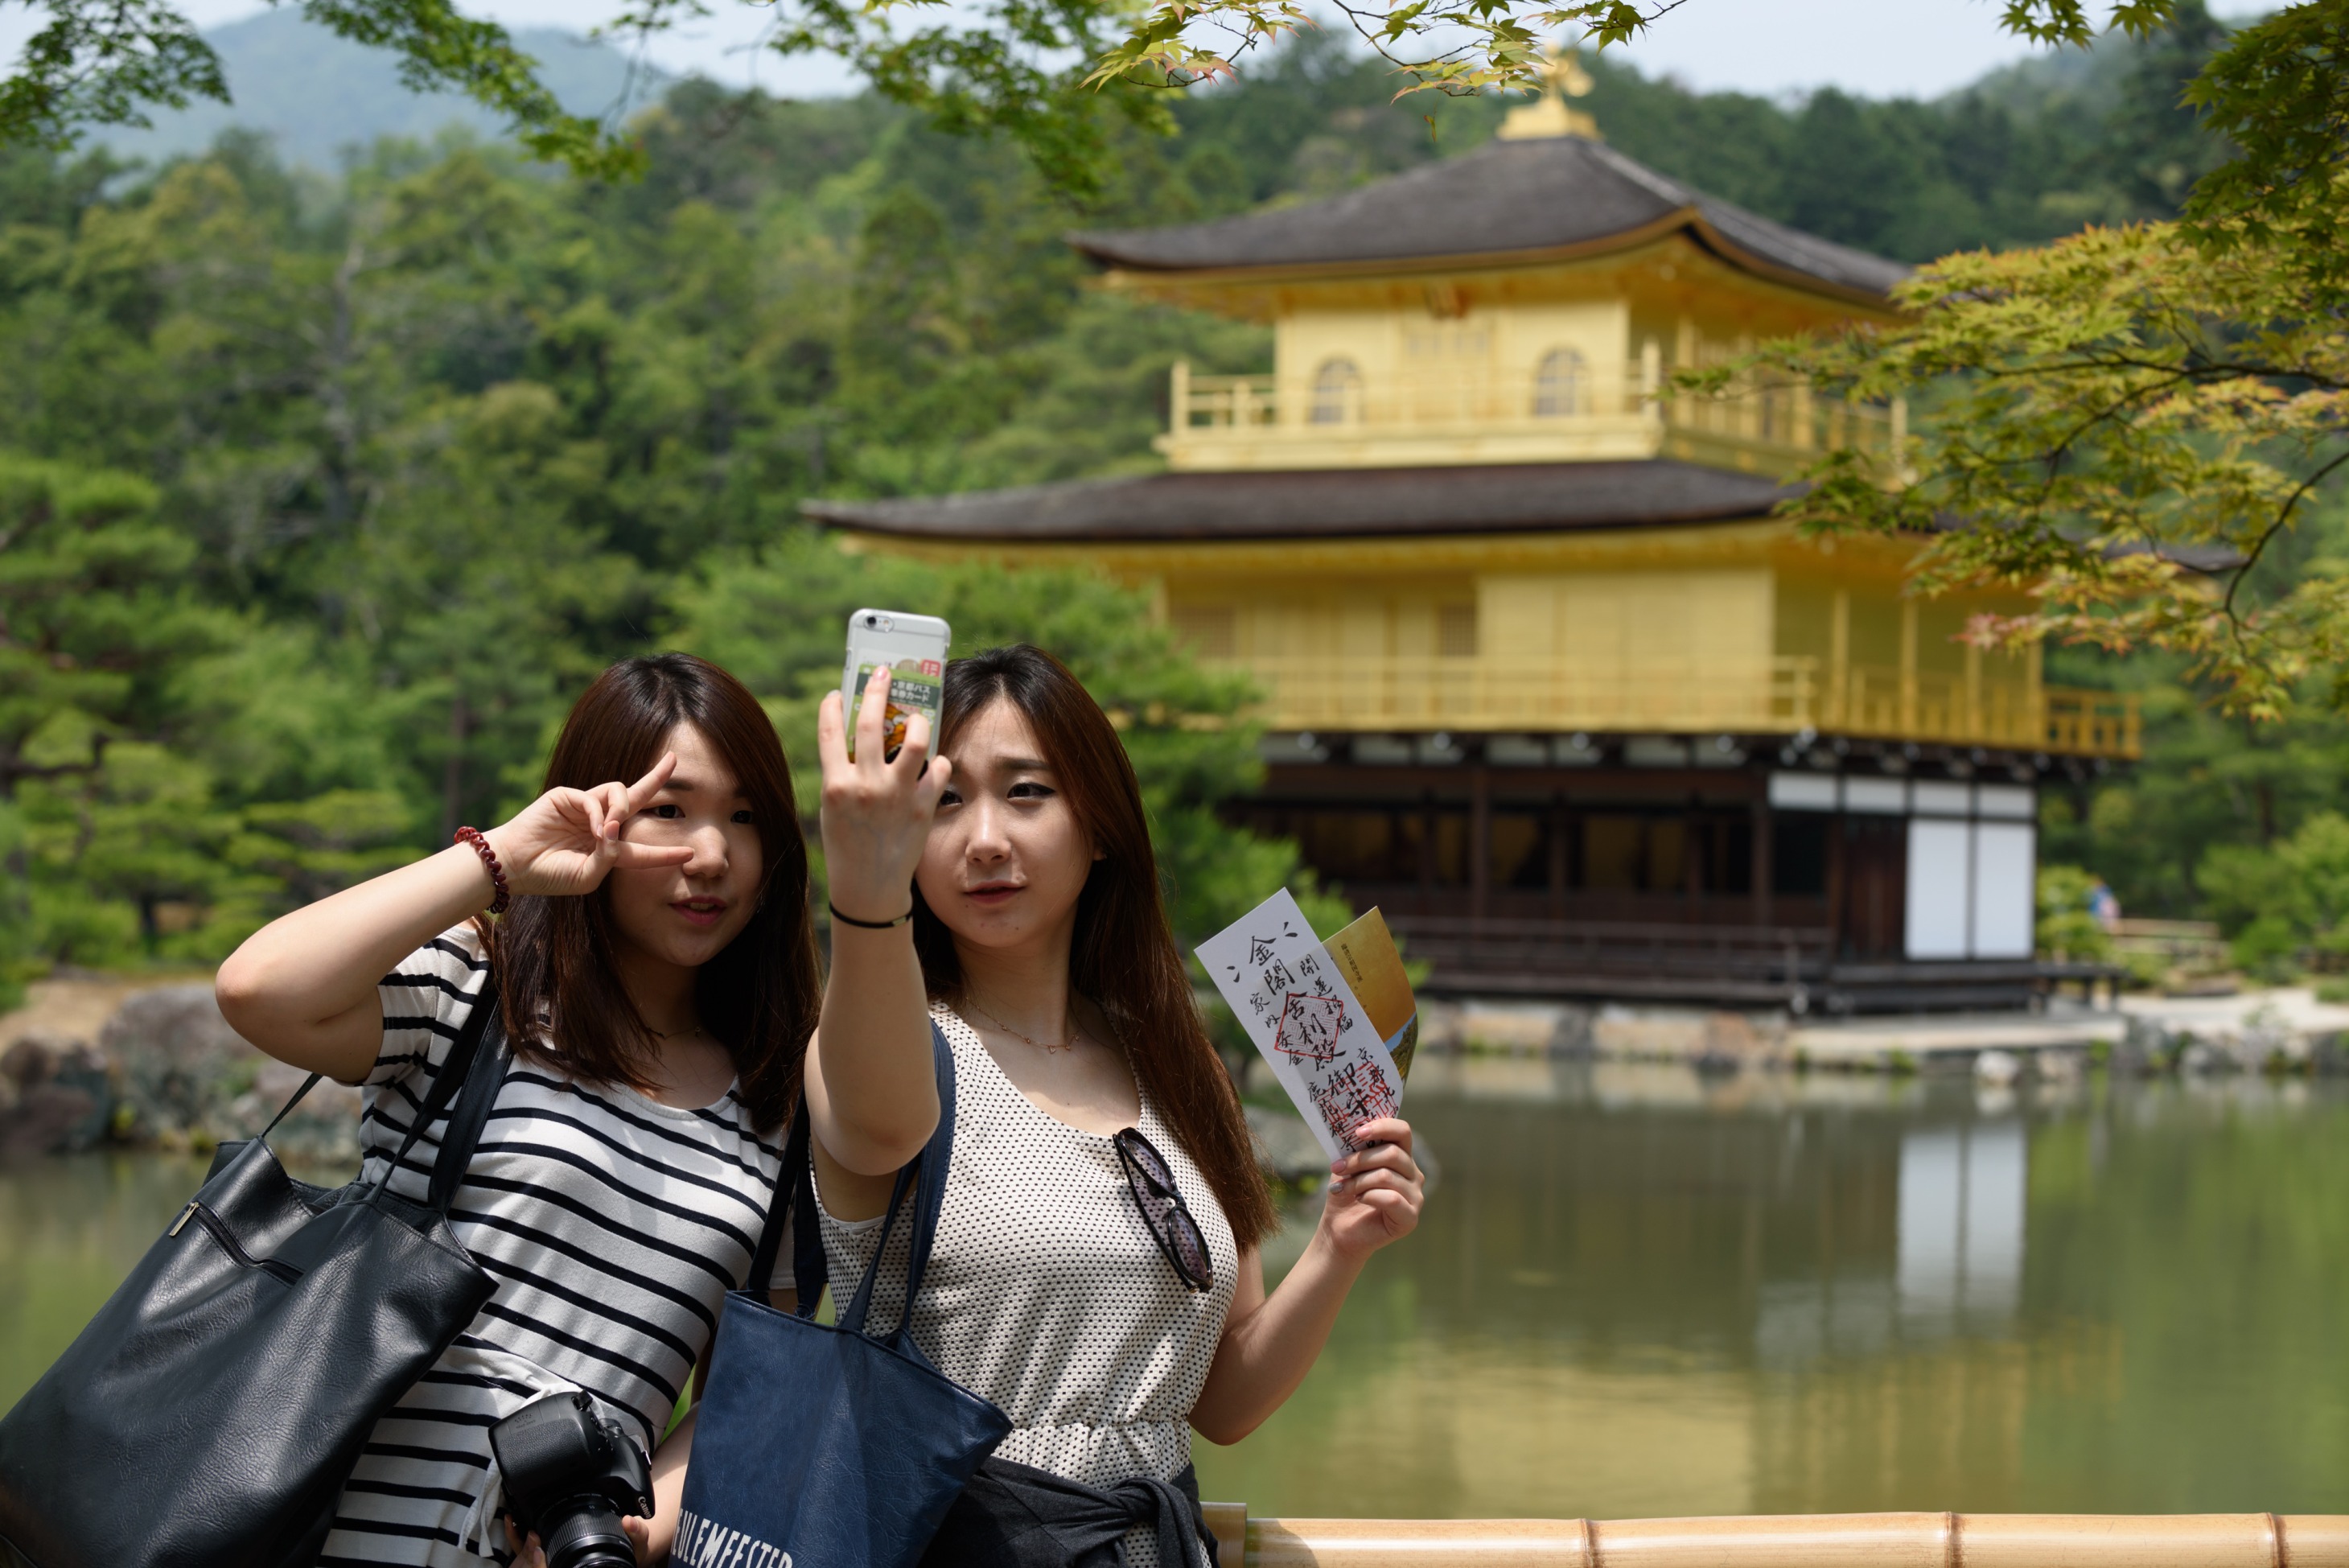 Tourists pose for a selfie in front of the Kinkakuji temple in Kyoto.